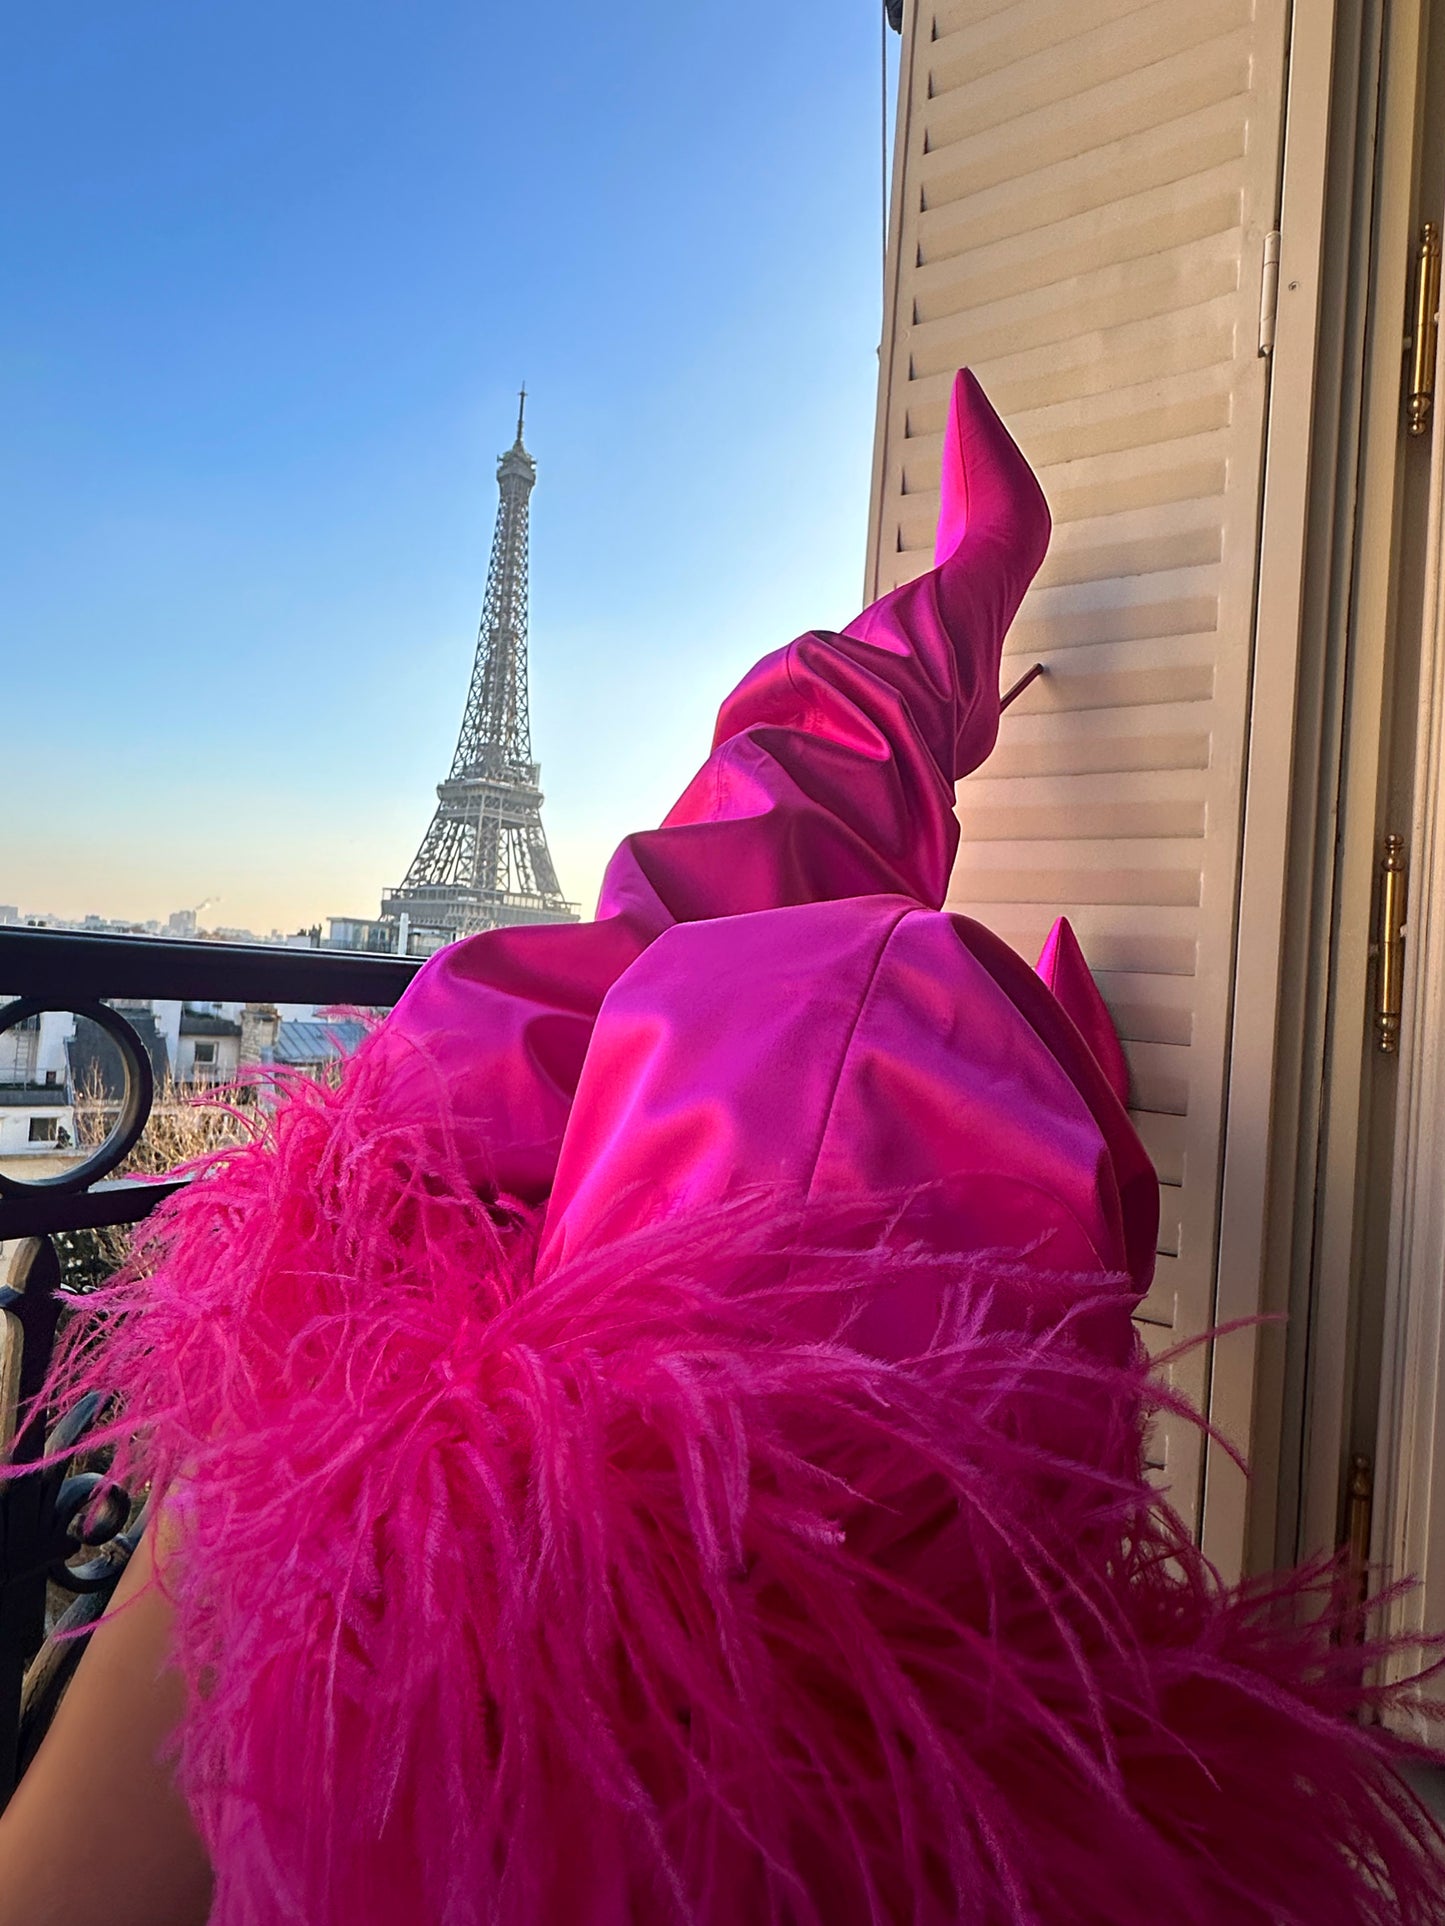 GABOR PINK OSTRICH FEATHER BOOT